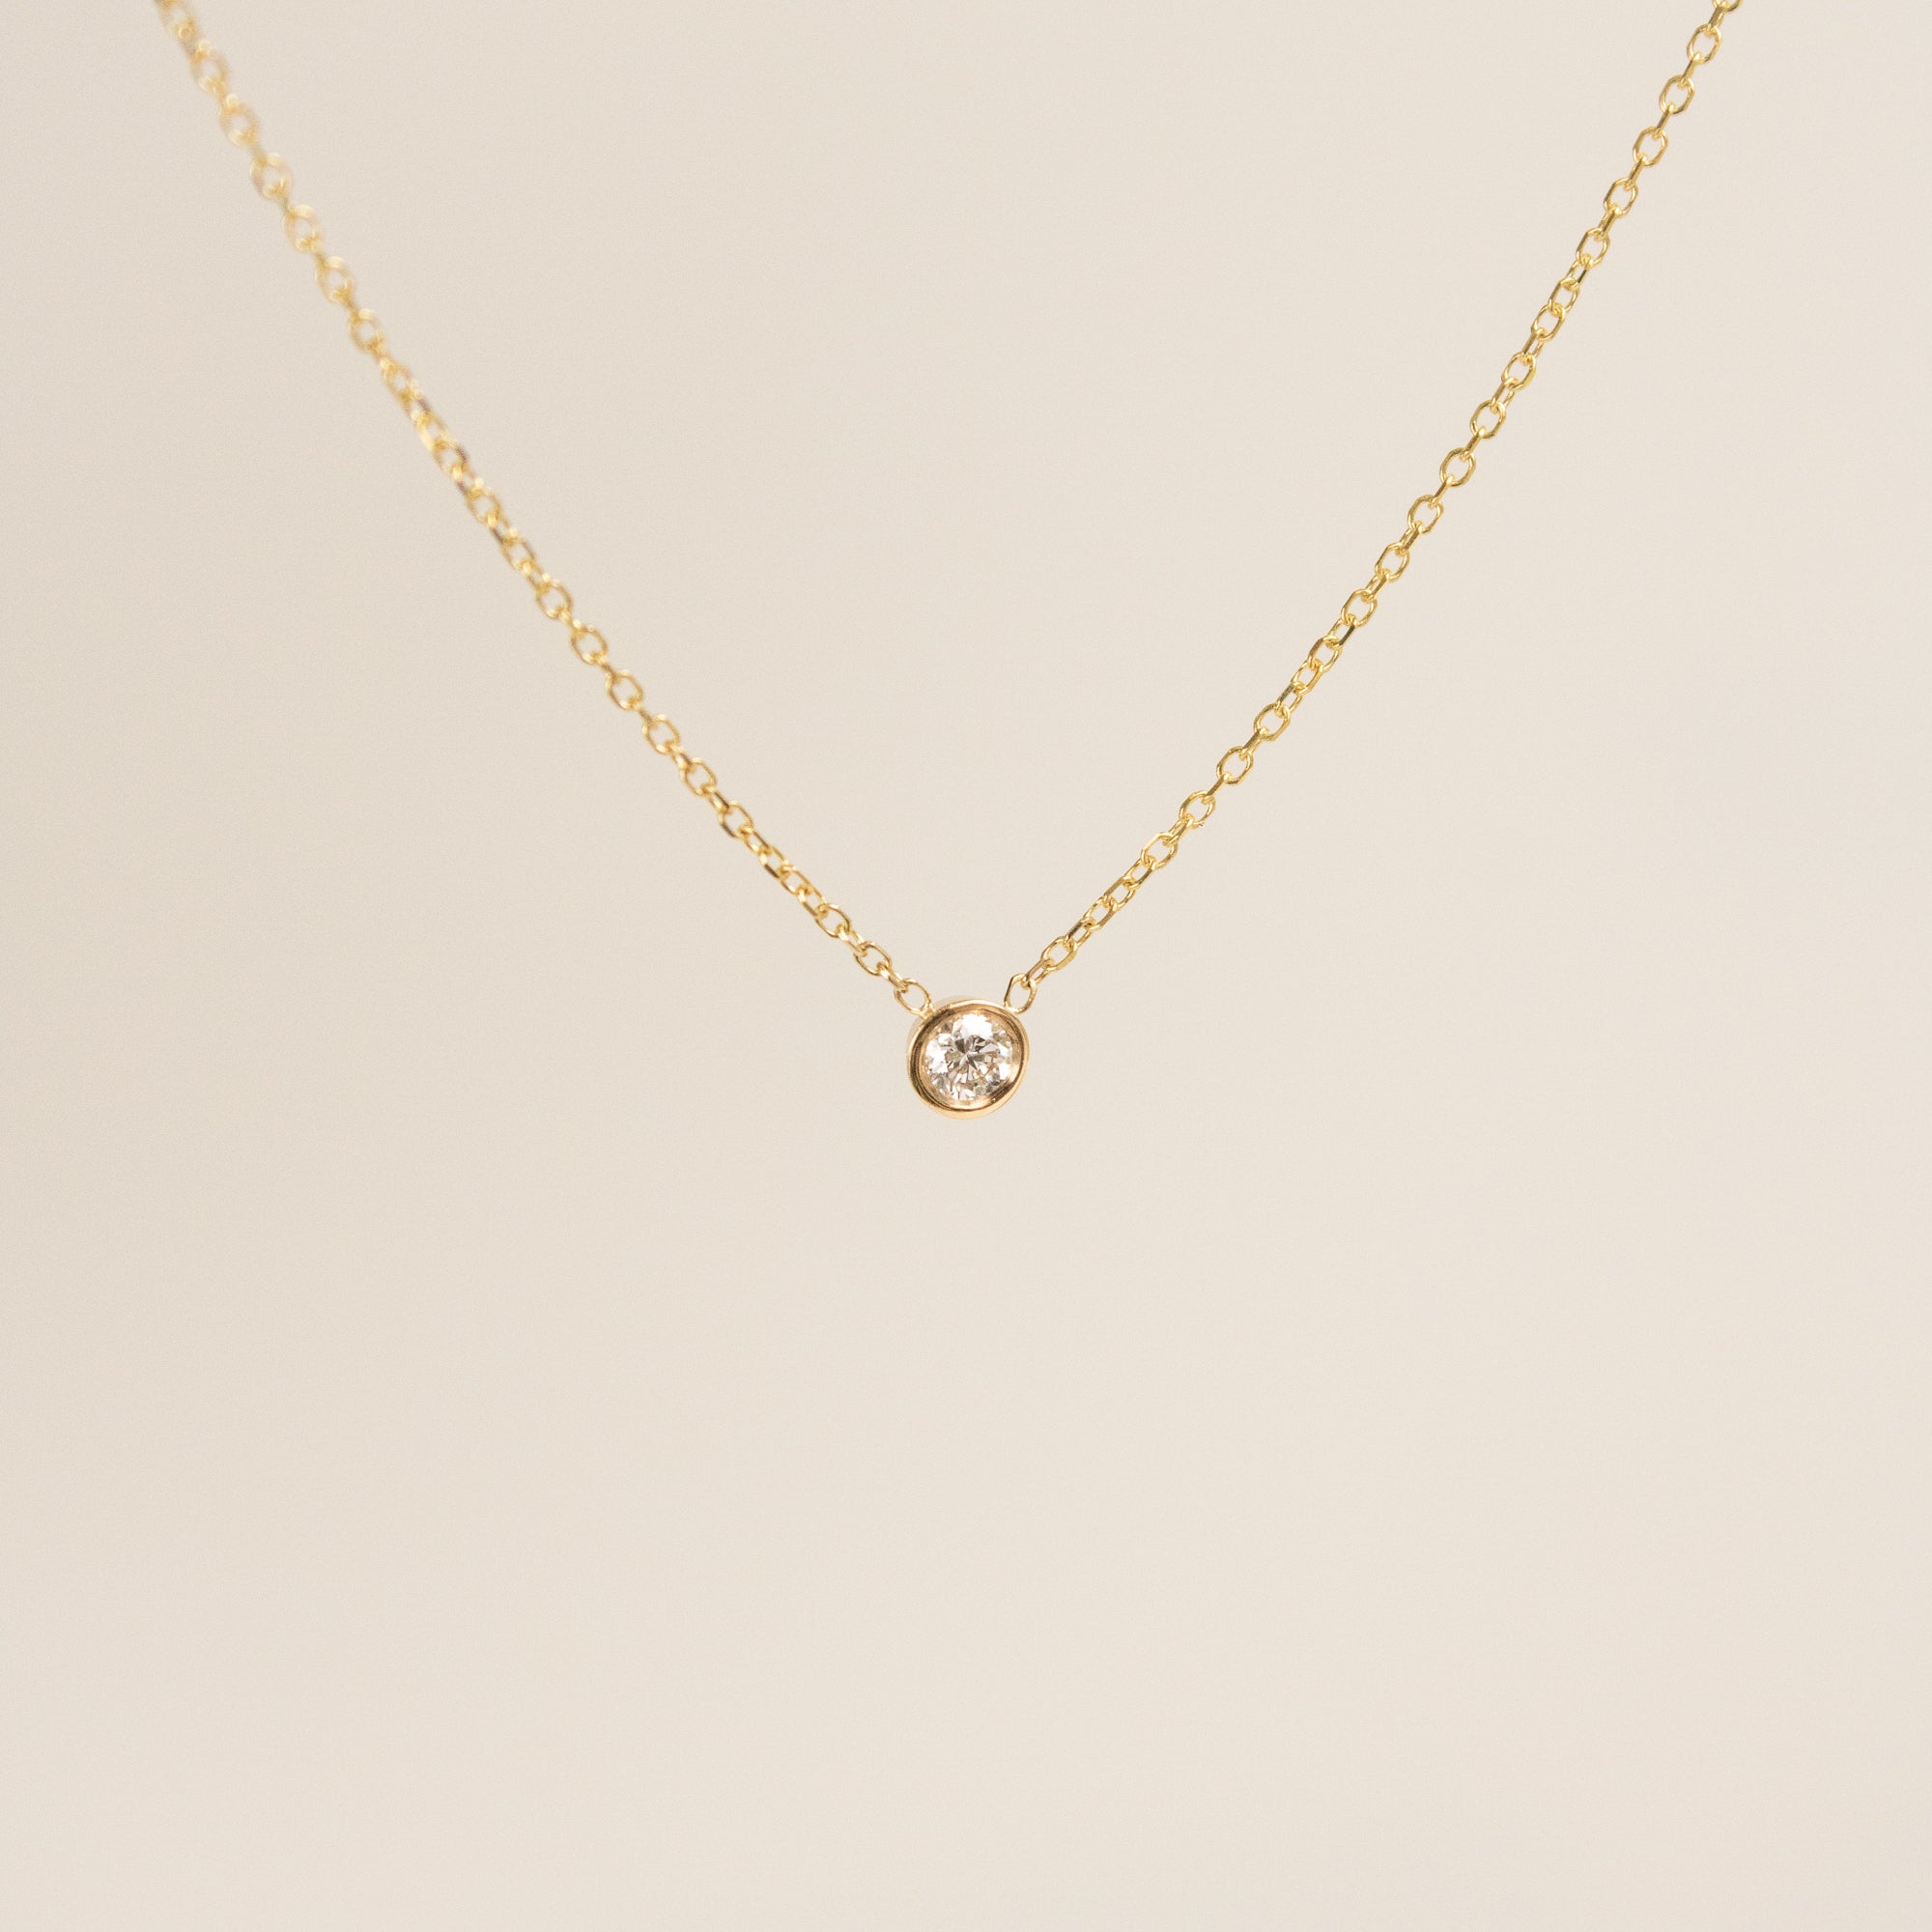 Barely-There Single Diamond Necklace